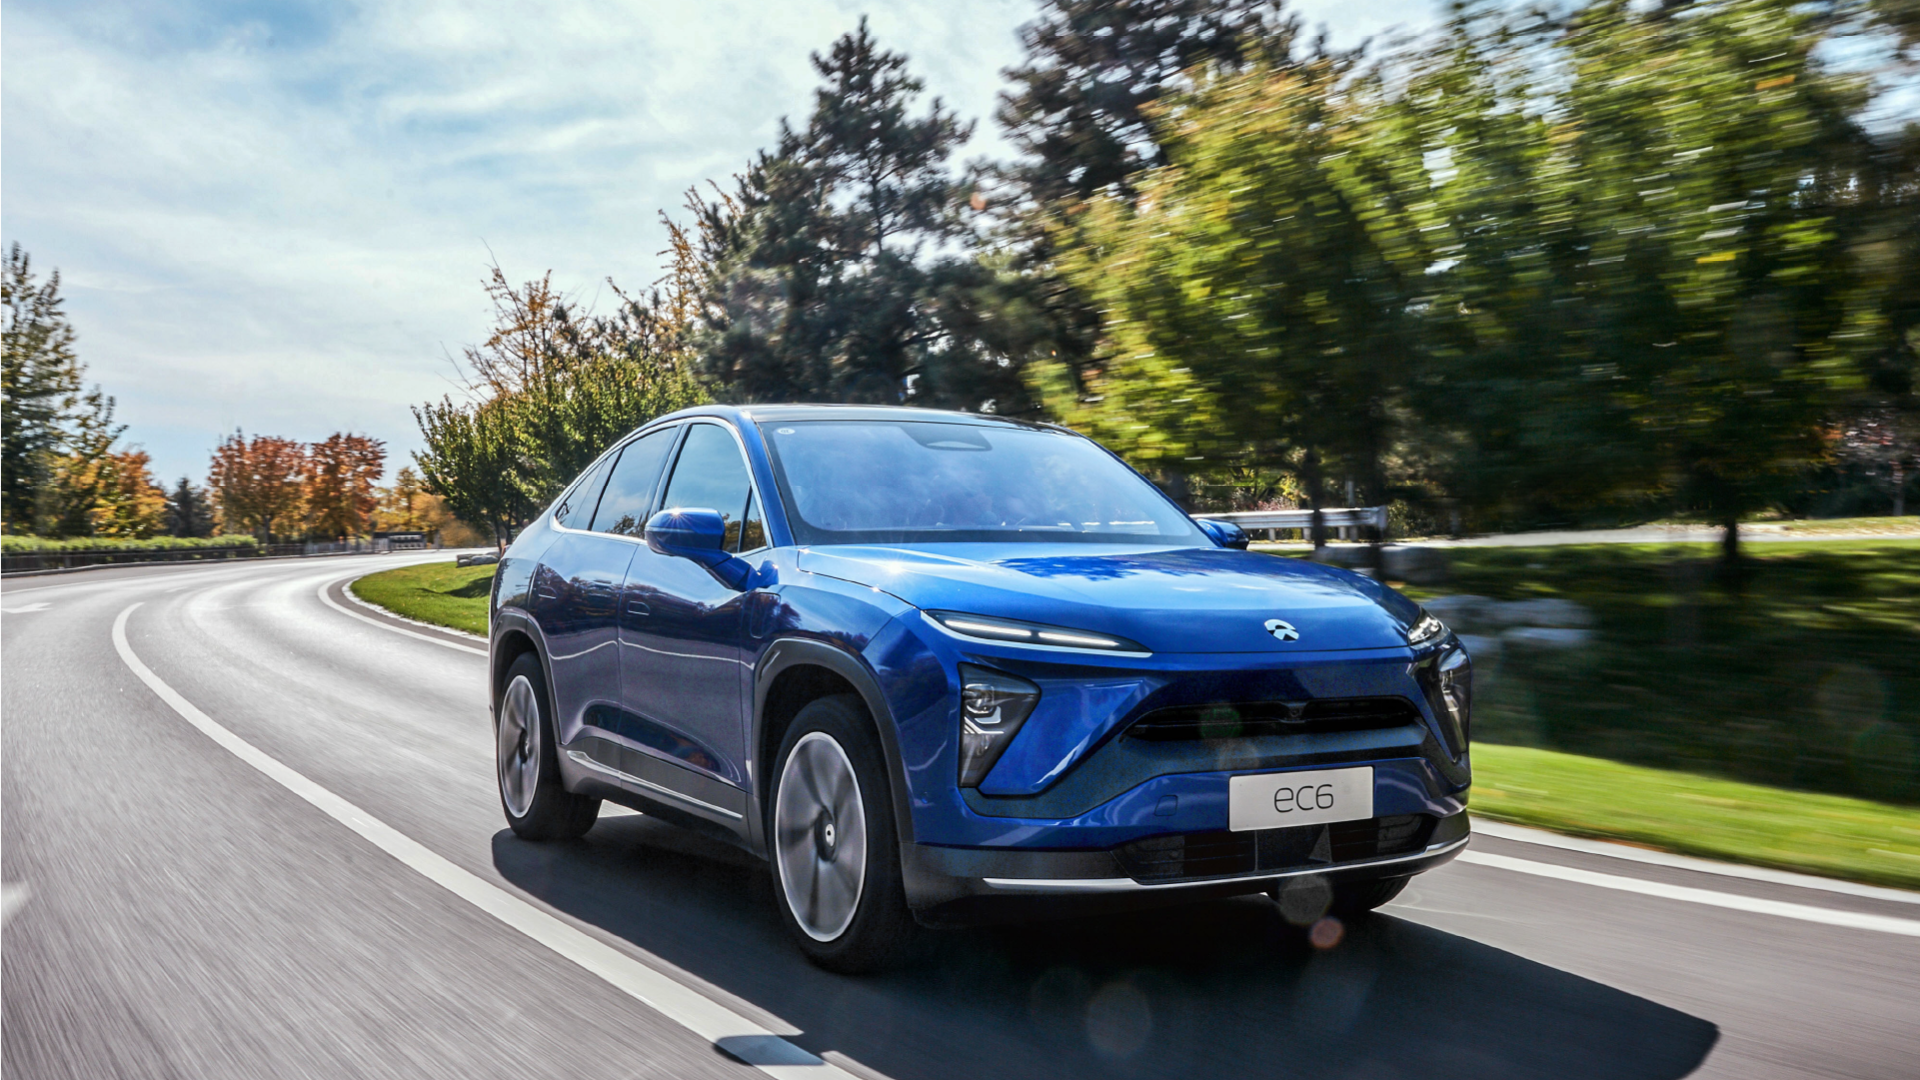 Tesla Rival Nio's December Deliveries Slip 3.6% From November, But More Than Double From Previous Year